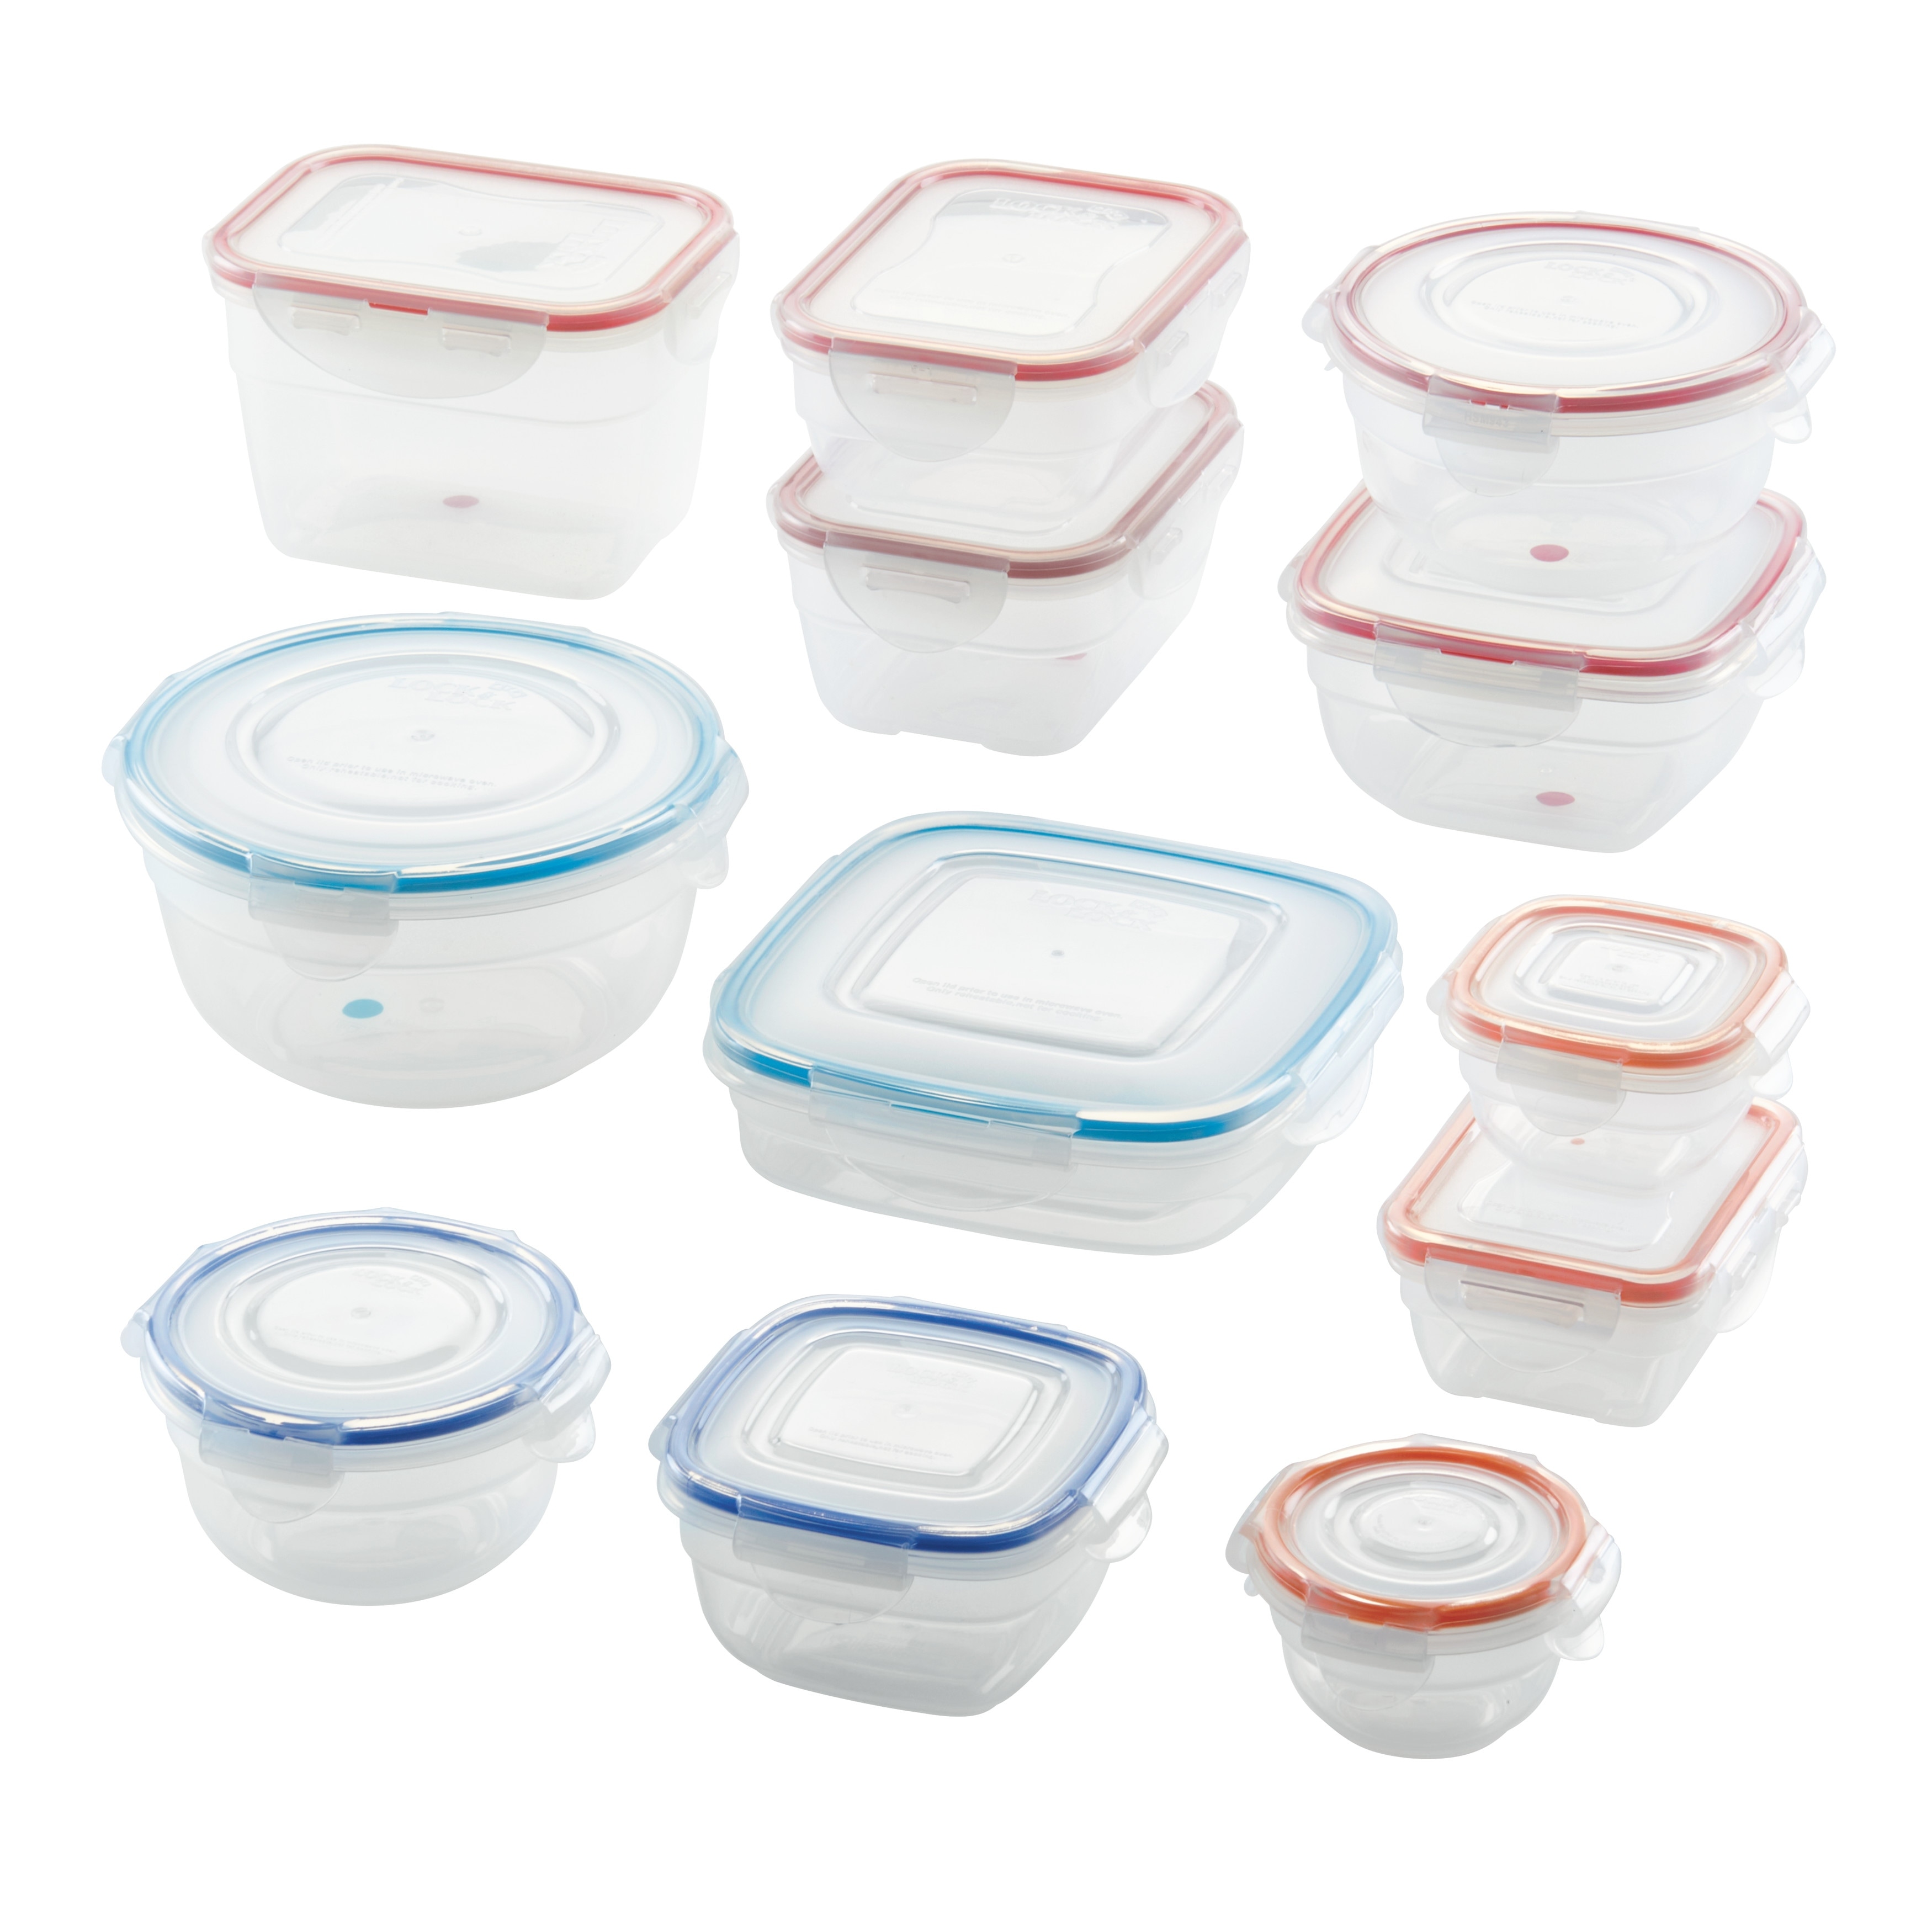 https://ak1.ostkcdn.com/images/products/is/images/direct/9597b8218fc07d8480482f25f4ac7a292284390a/LocknLock-Easy-Essentials-Color-Mates-Storage-Container-Set%2C-24-Piece.jpg